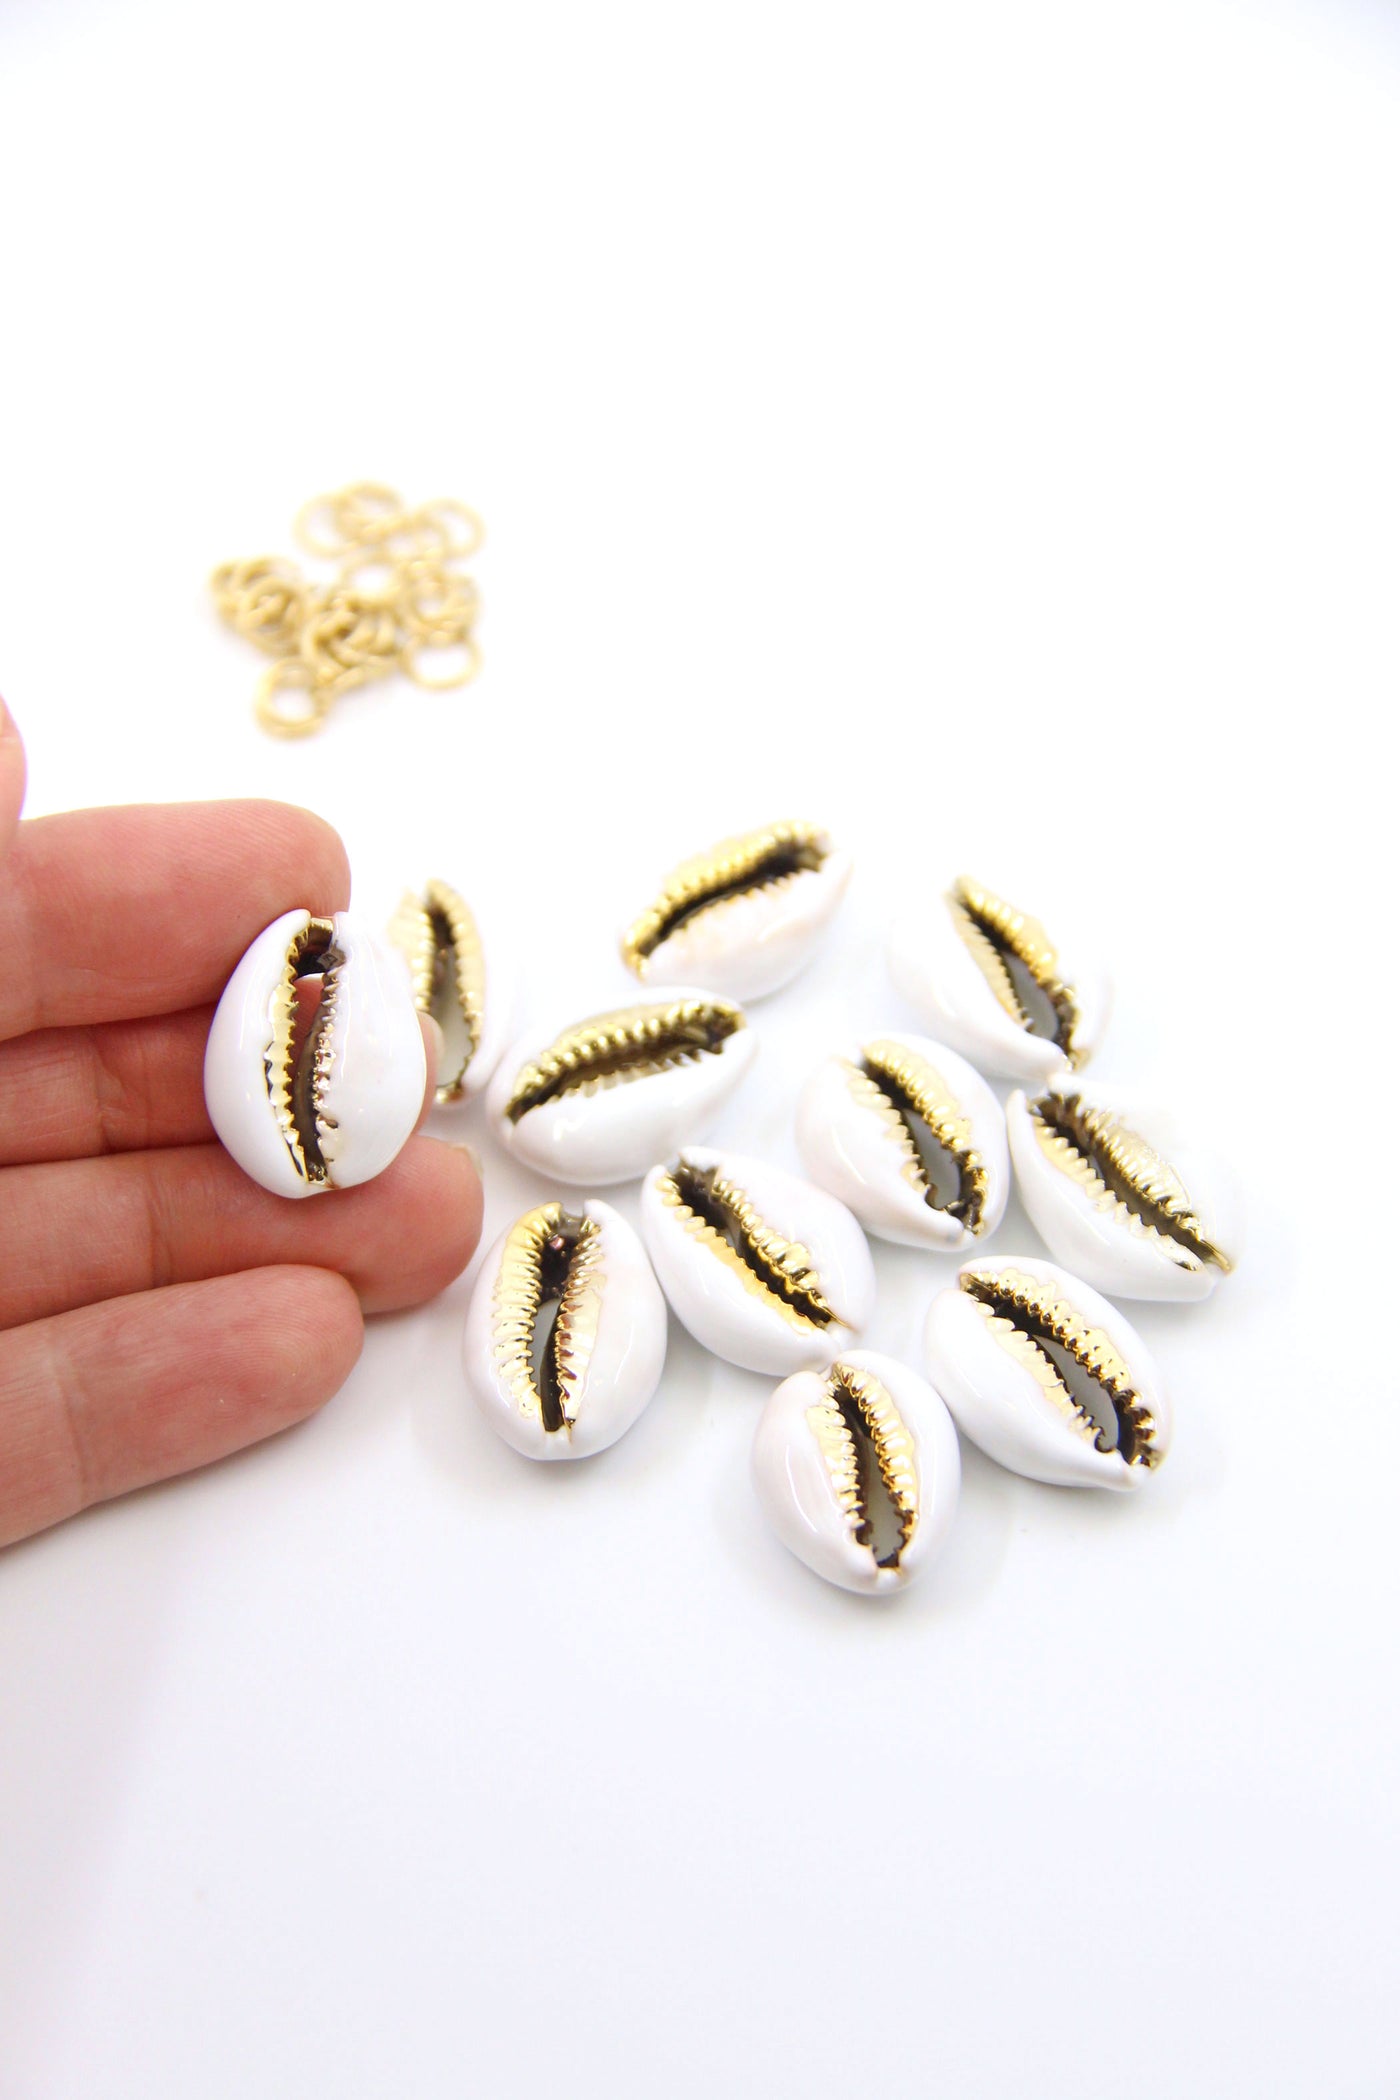 painted cowry shells